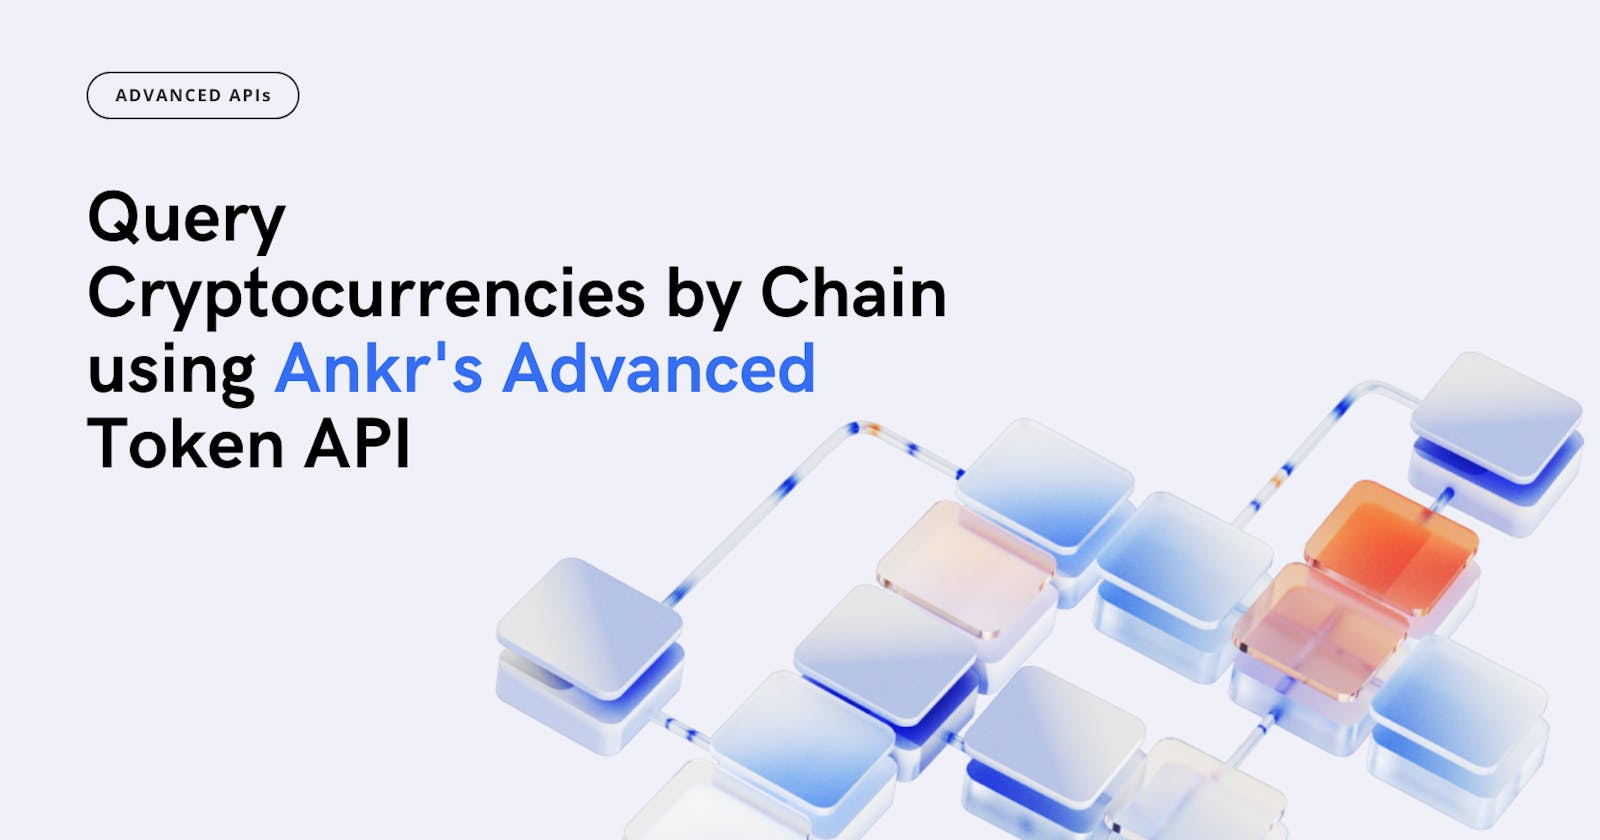 Fetch the list of cryptocurrencies launched on a particular Blockchain using Ankr’s Token API